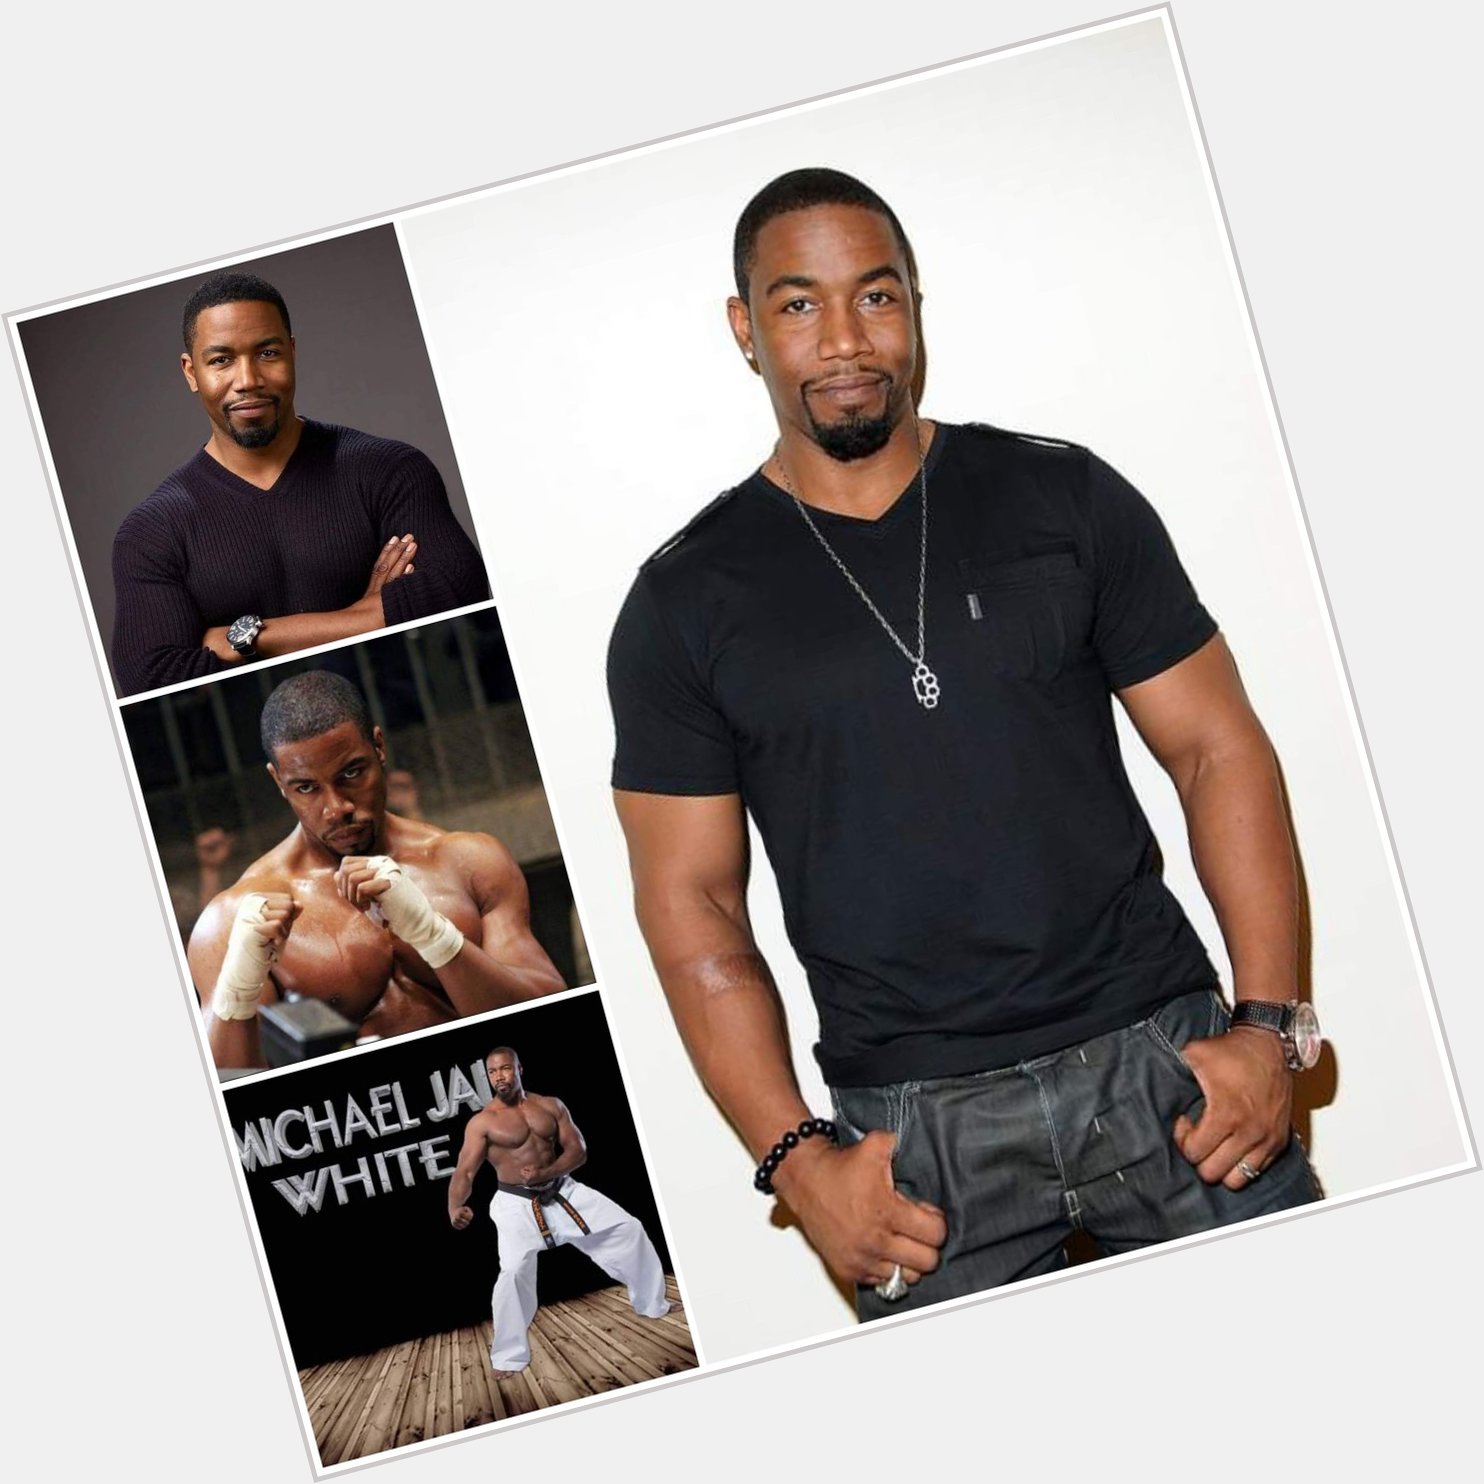 Happy Birthday to the legend Michael jai White have a safe celebration enjoy your special day        